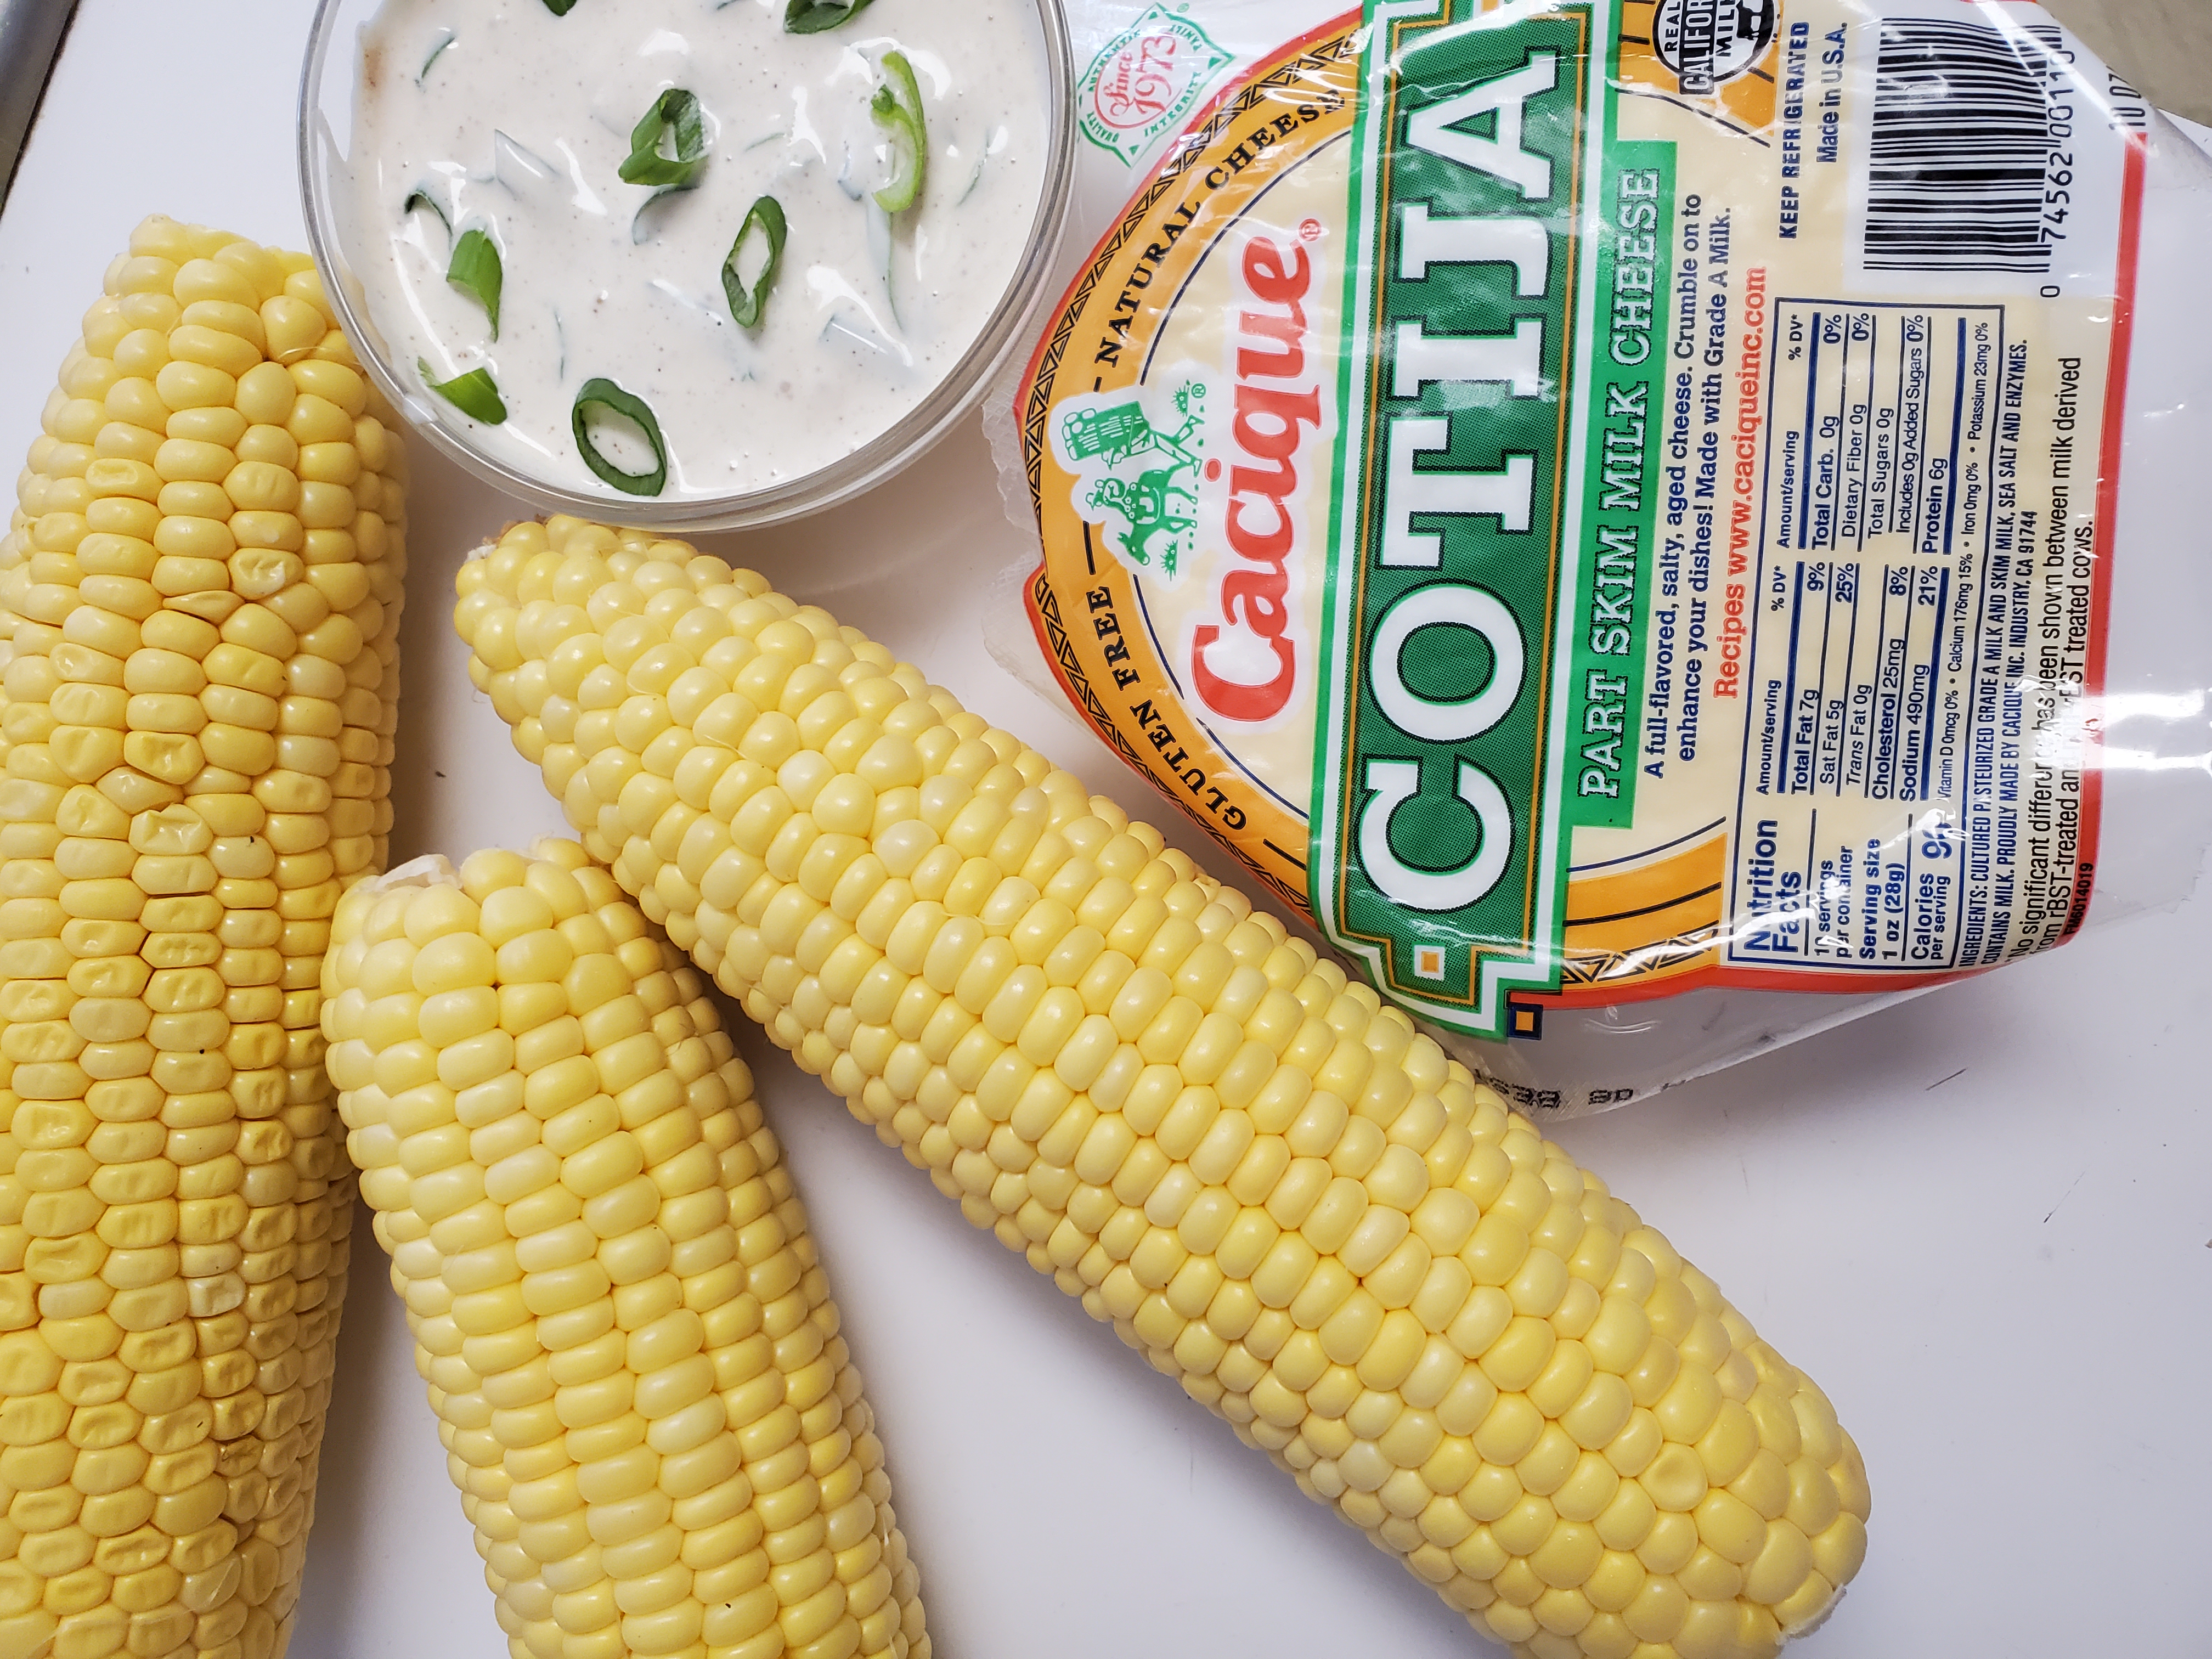 ingredients to make mexican street corn - corn on the cob, cotija cheese, sour cream, mayonnaise, and lime juice